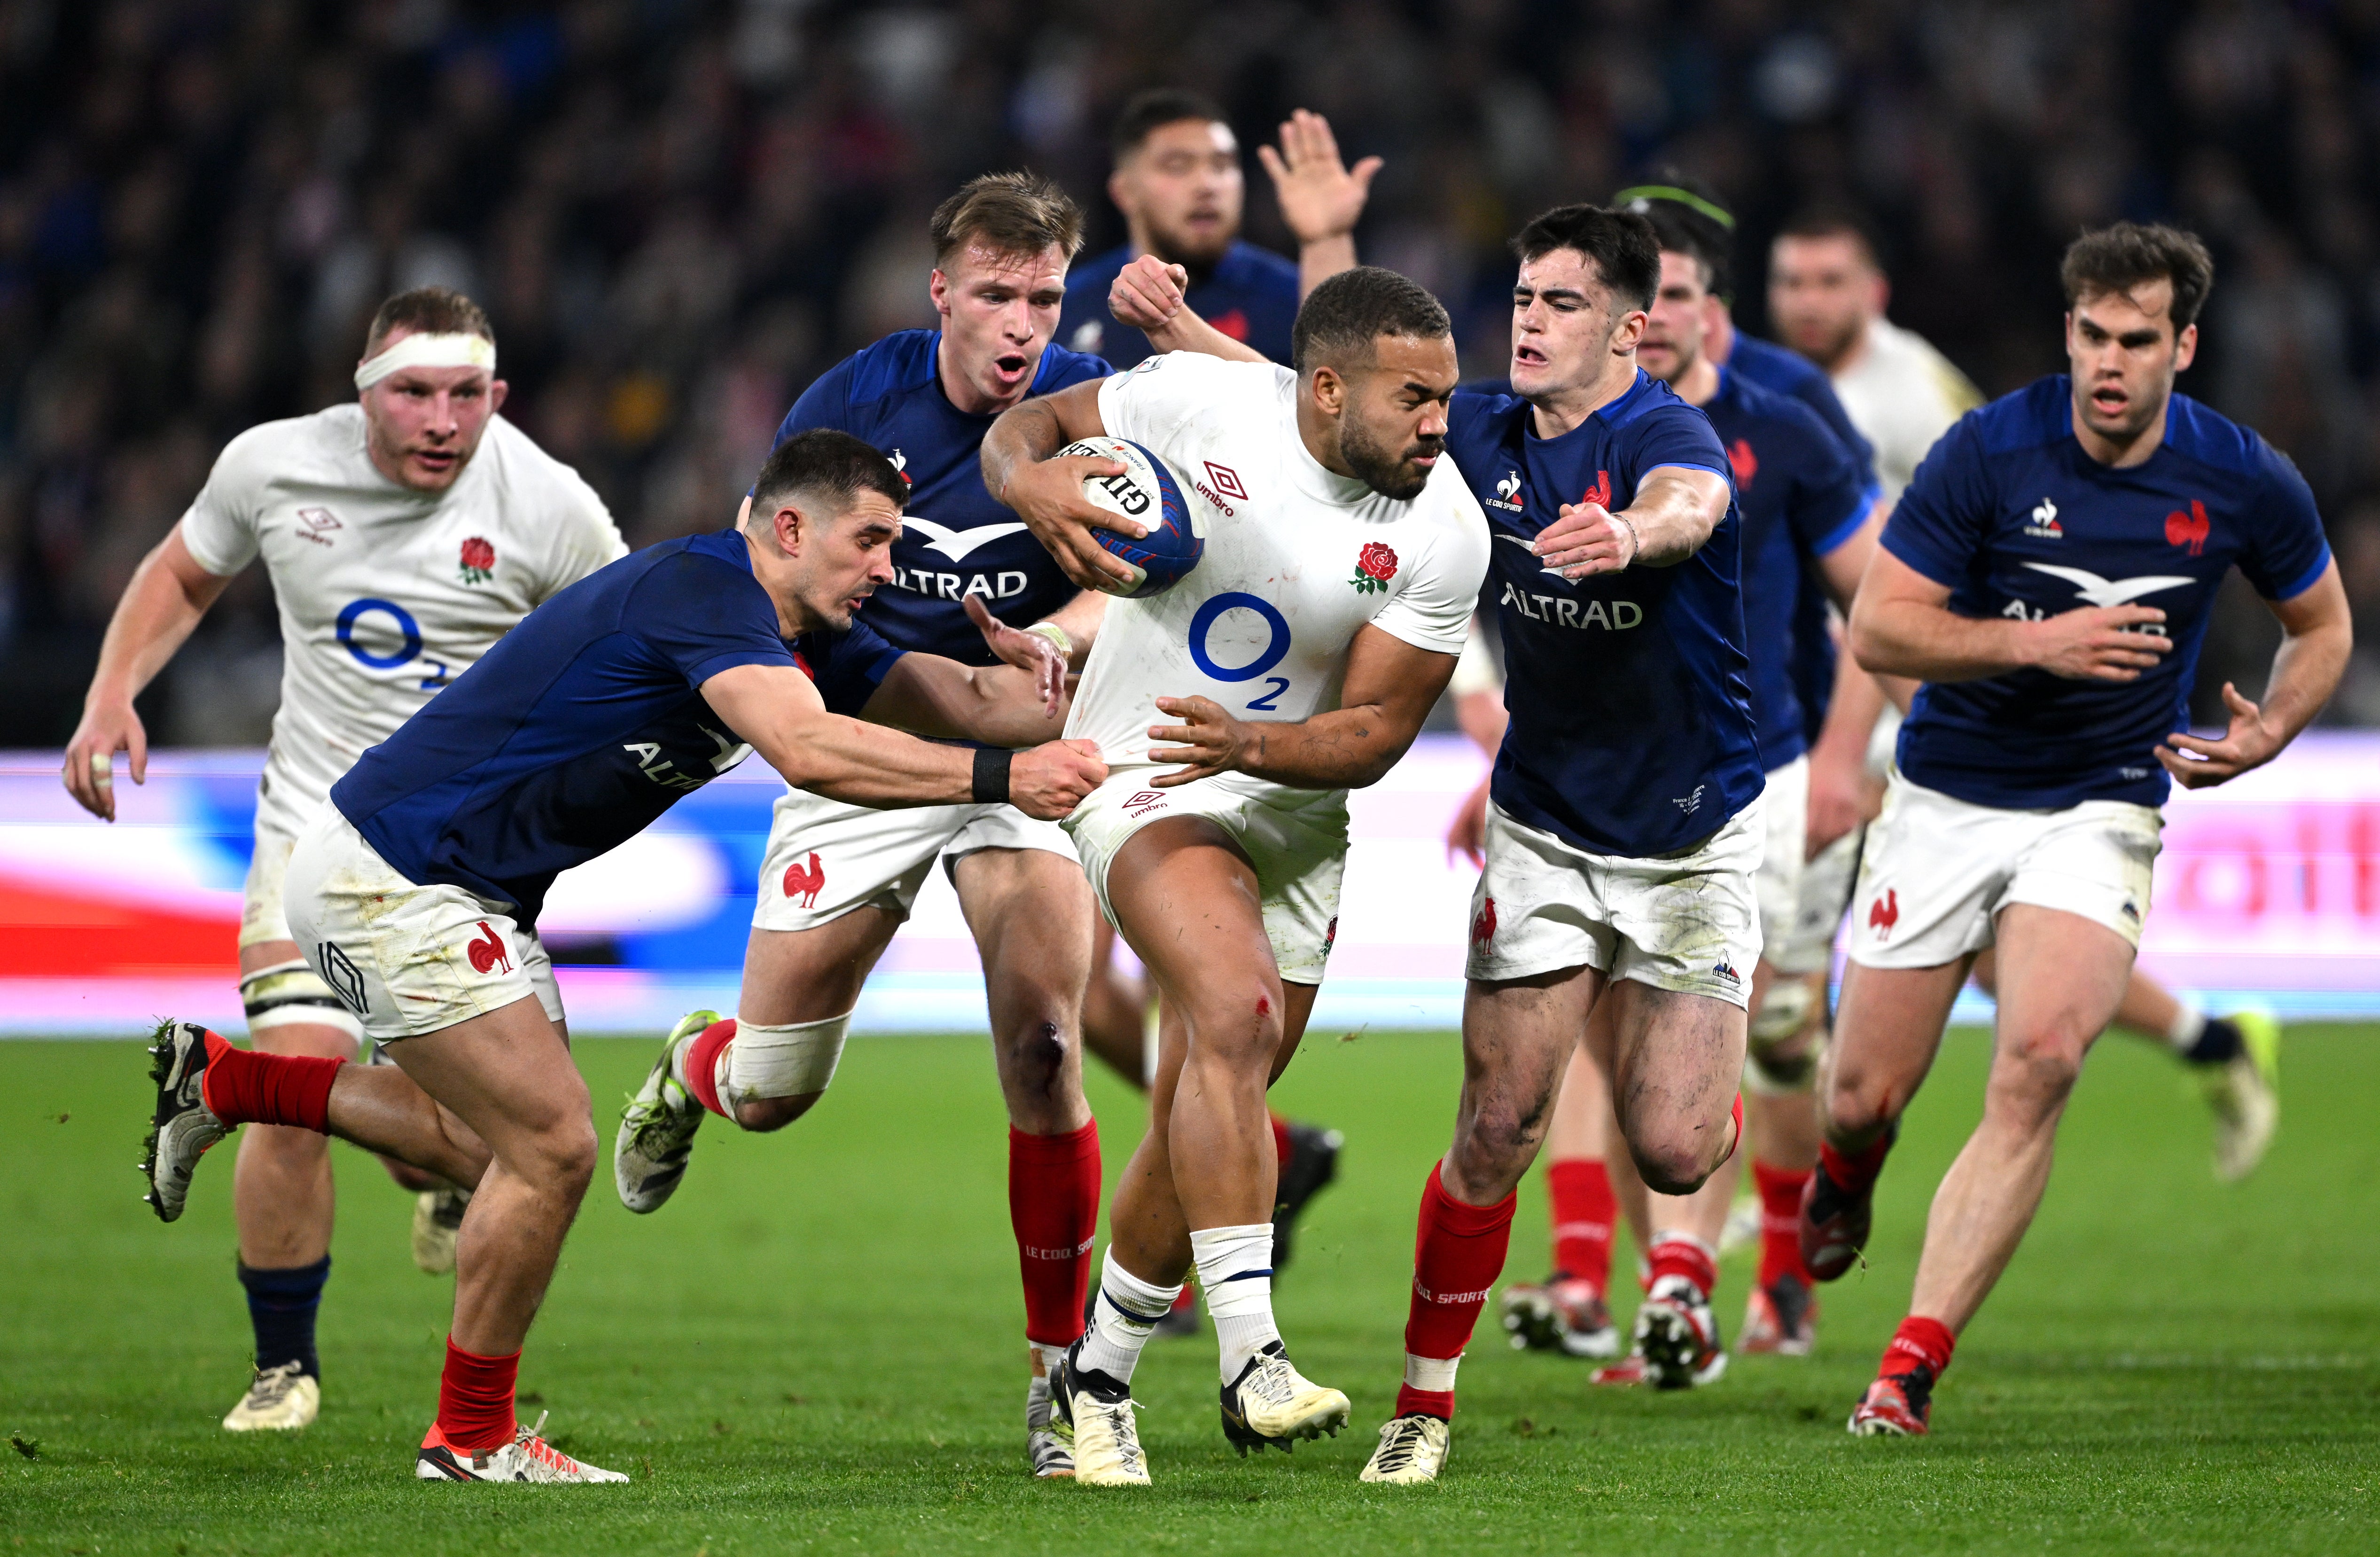 England showed off their attacking potential in the second half in Lyon